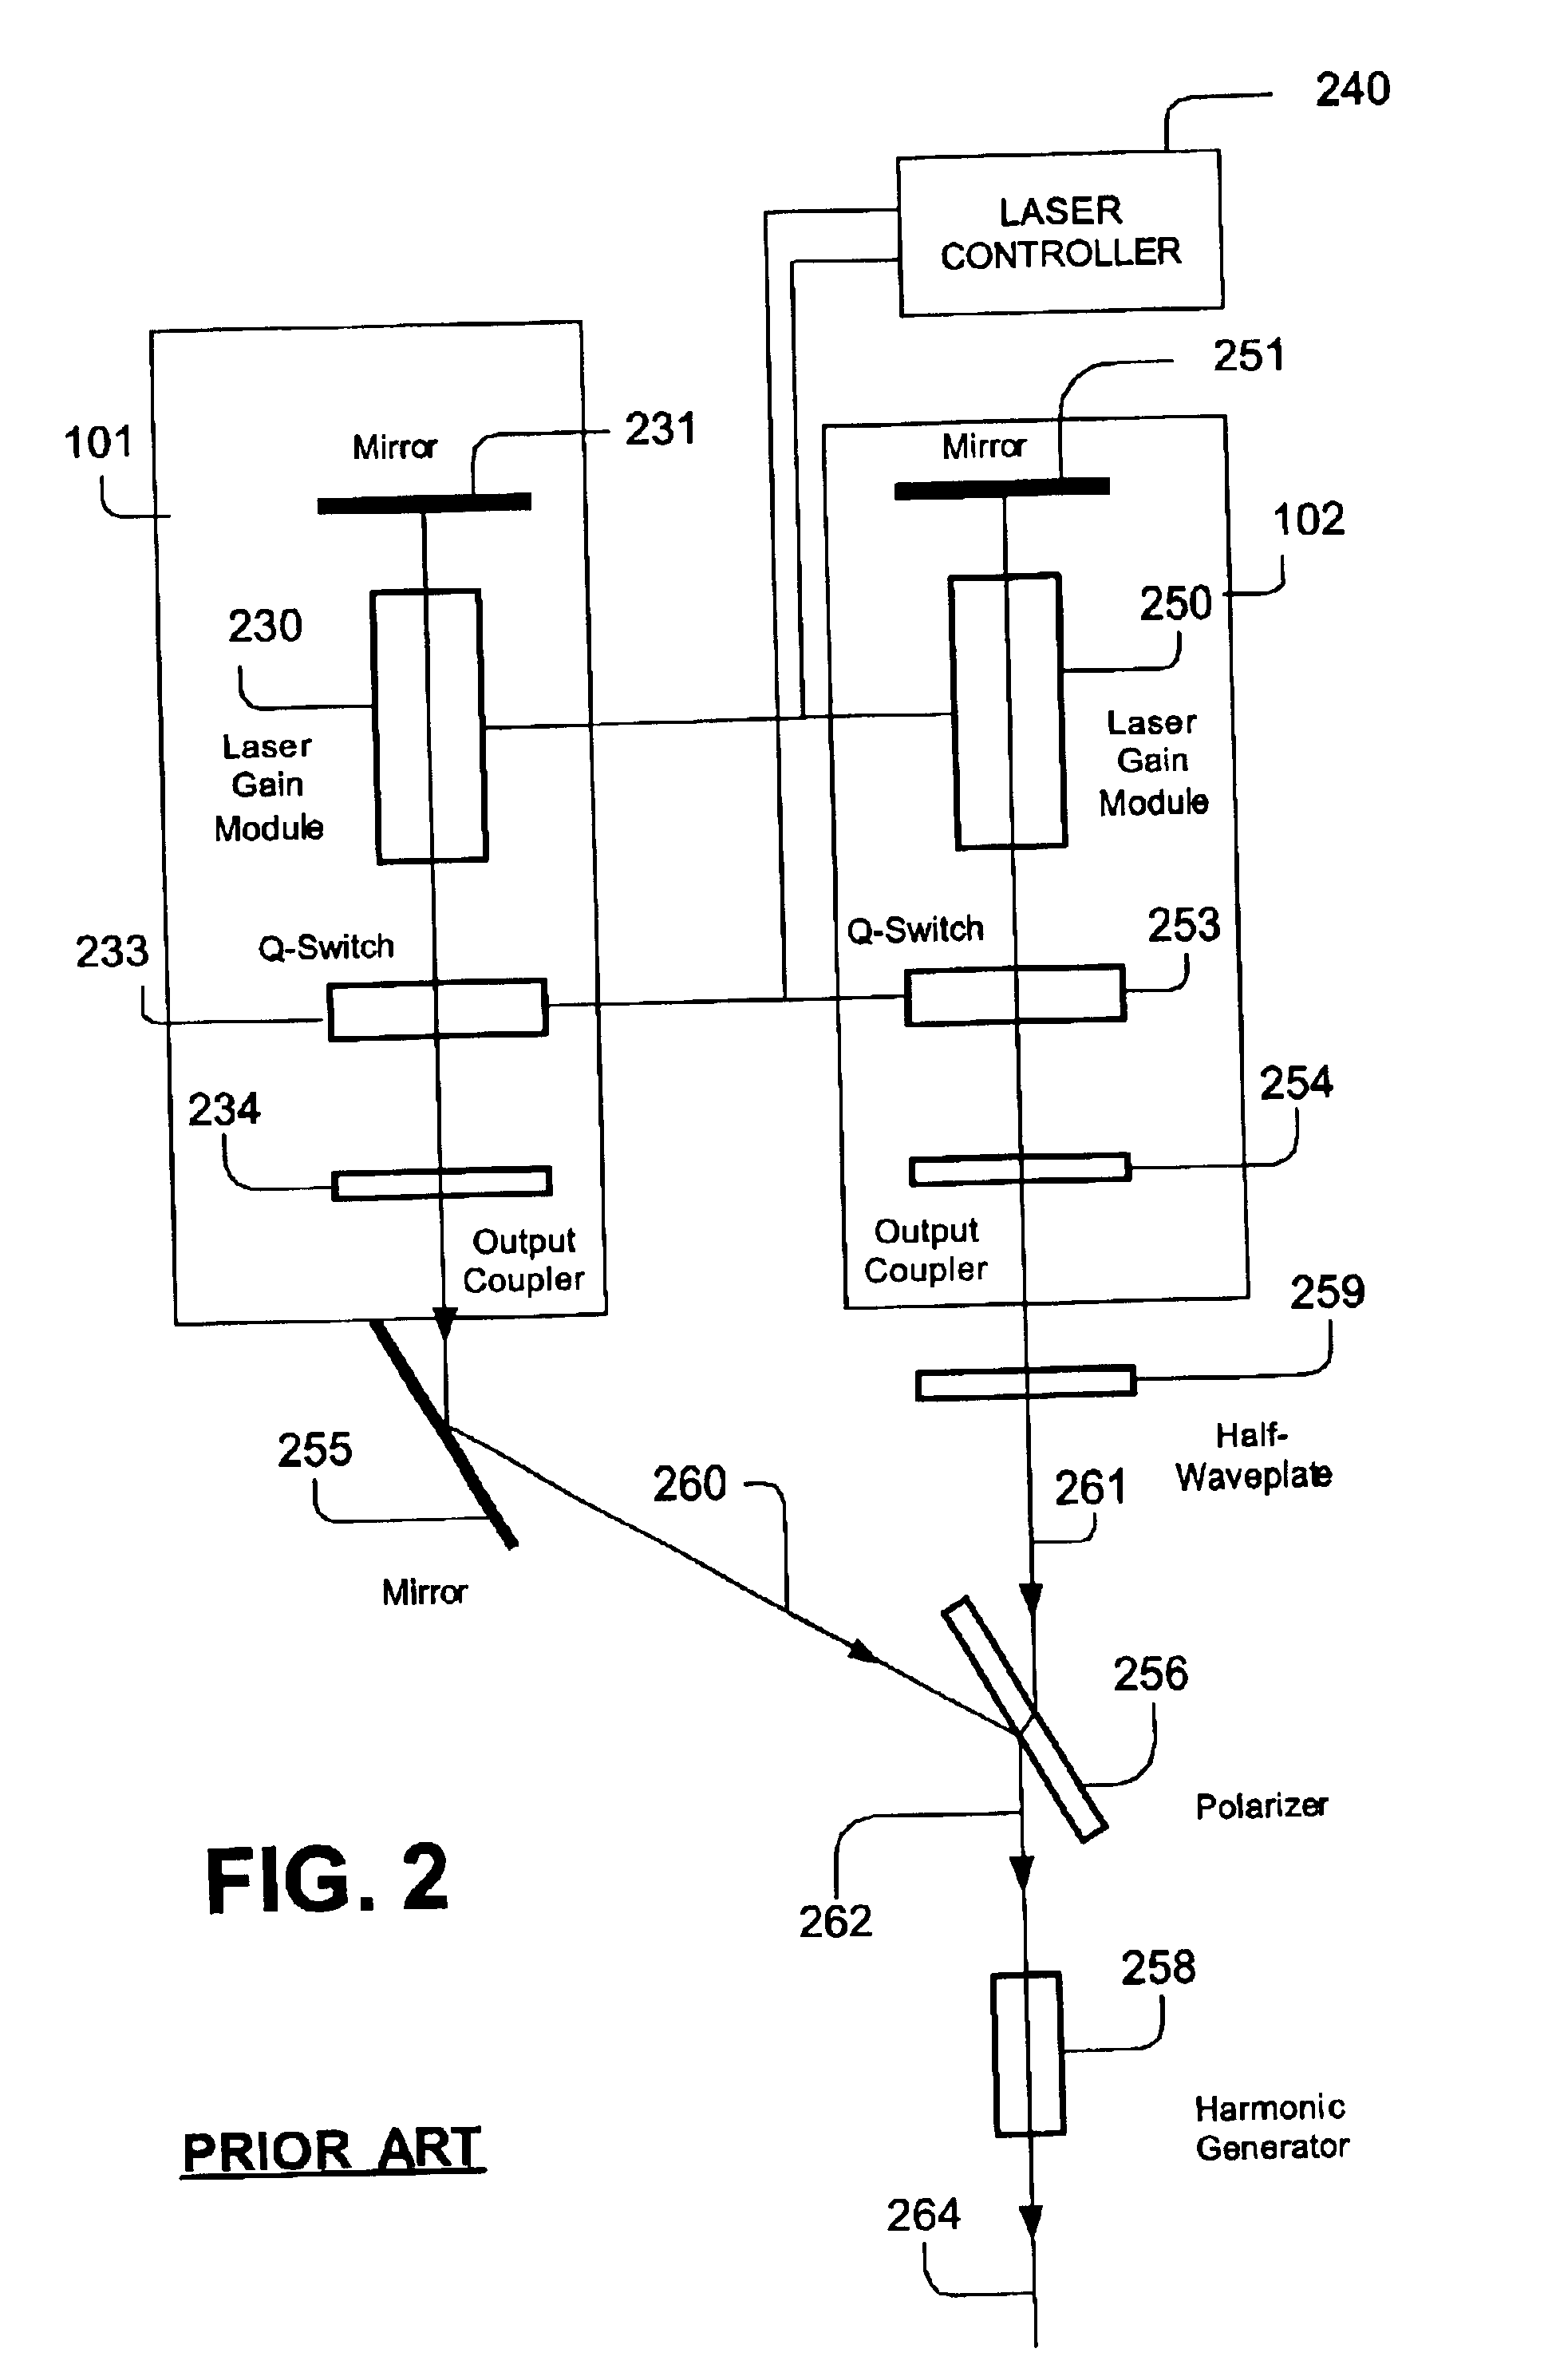 Dual head laser system with intra-cavity polarization, and particle image velocimetry system using same